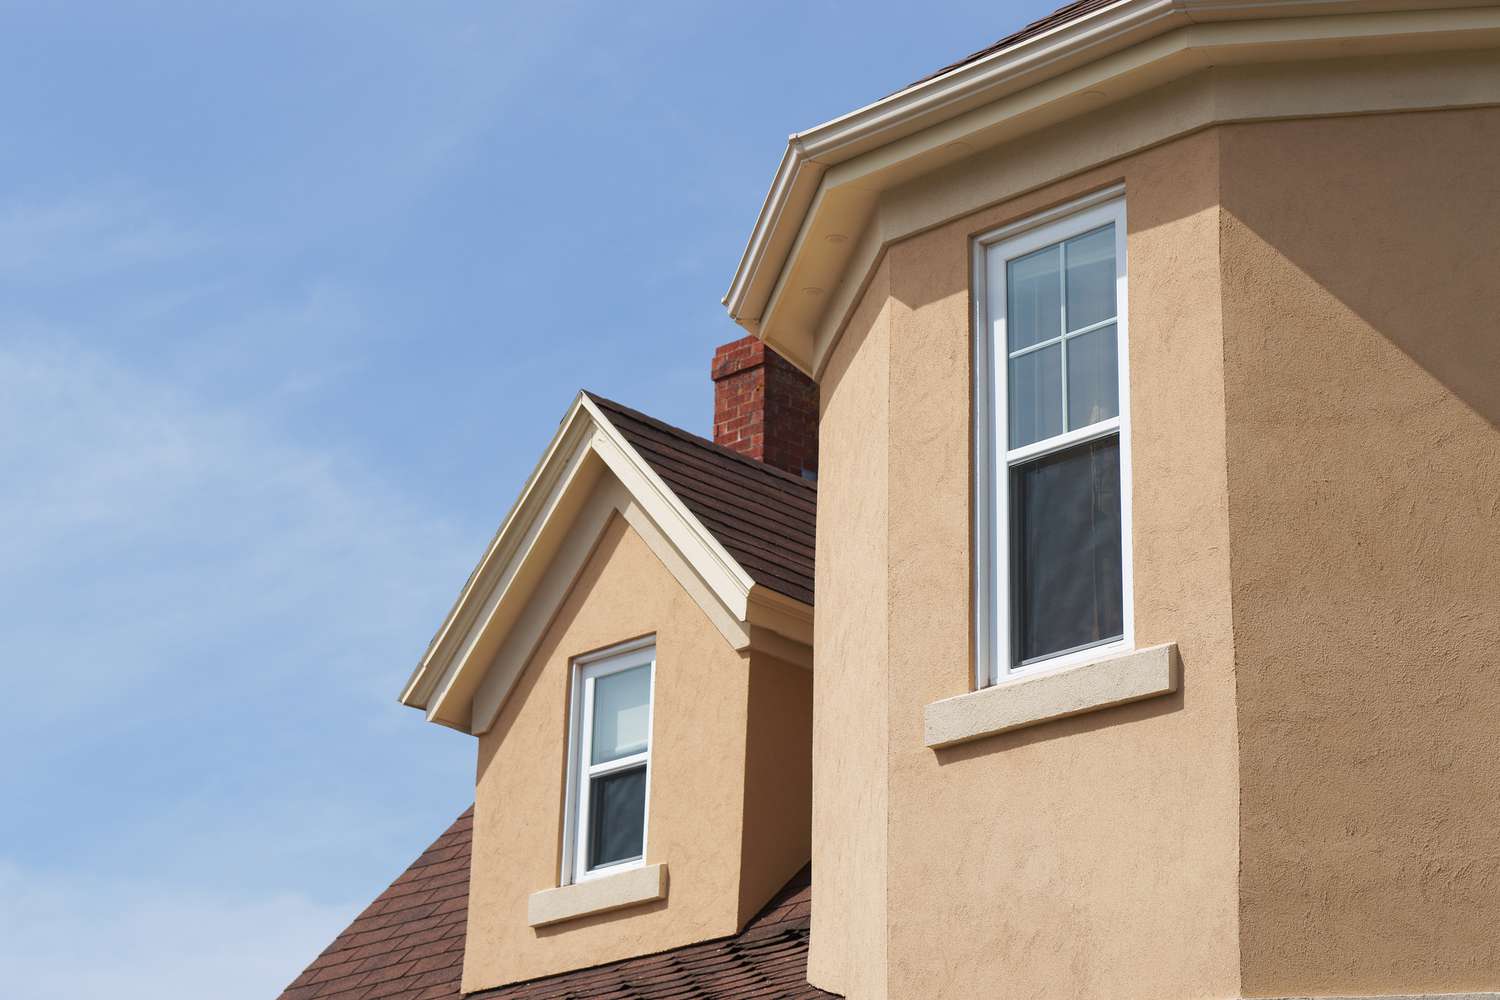 Stucco Market- Report 2022: Industry Analysis, Size, Share, Segmentation, Price Trends, Regional Analysis and Forecast 2030